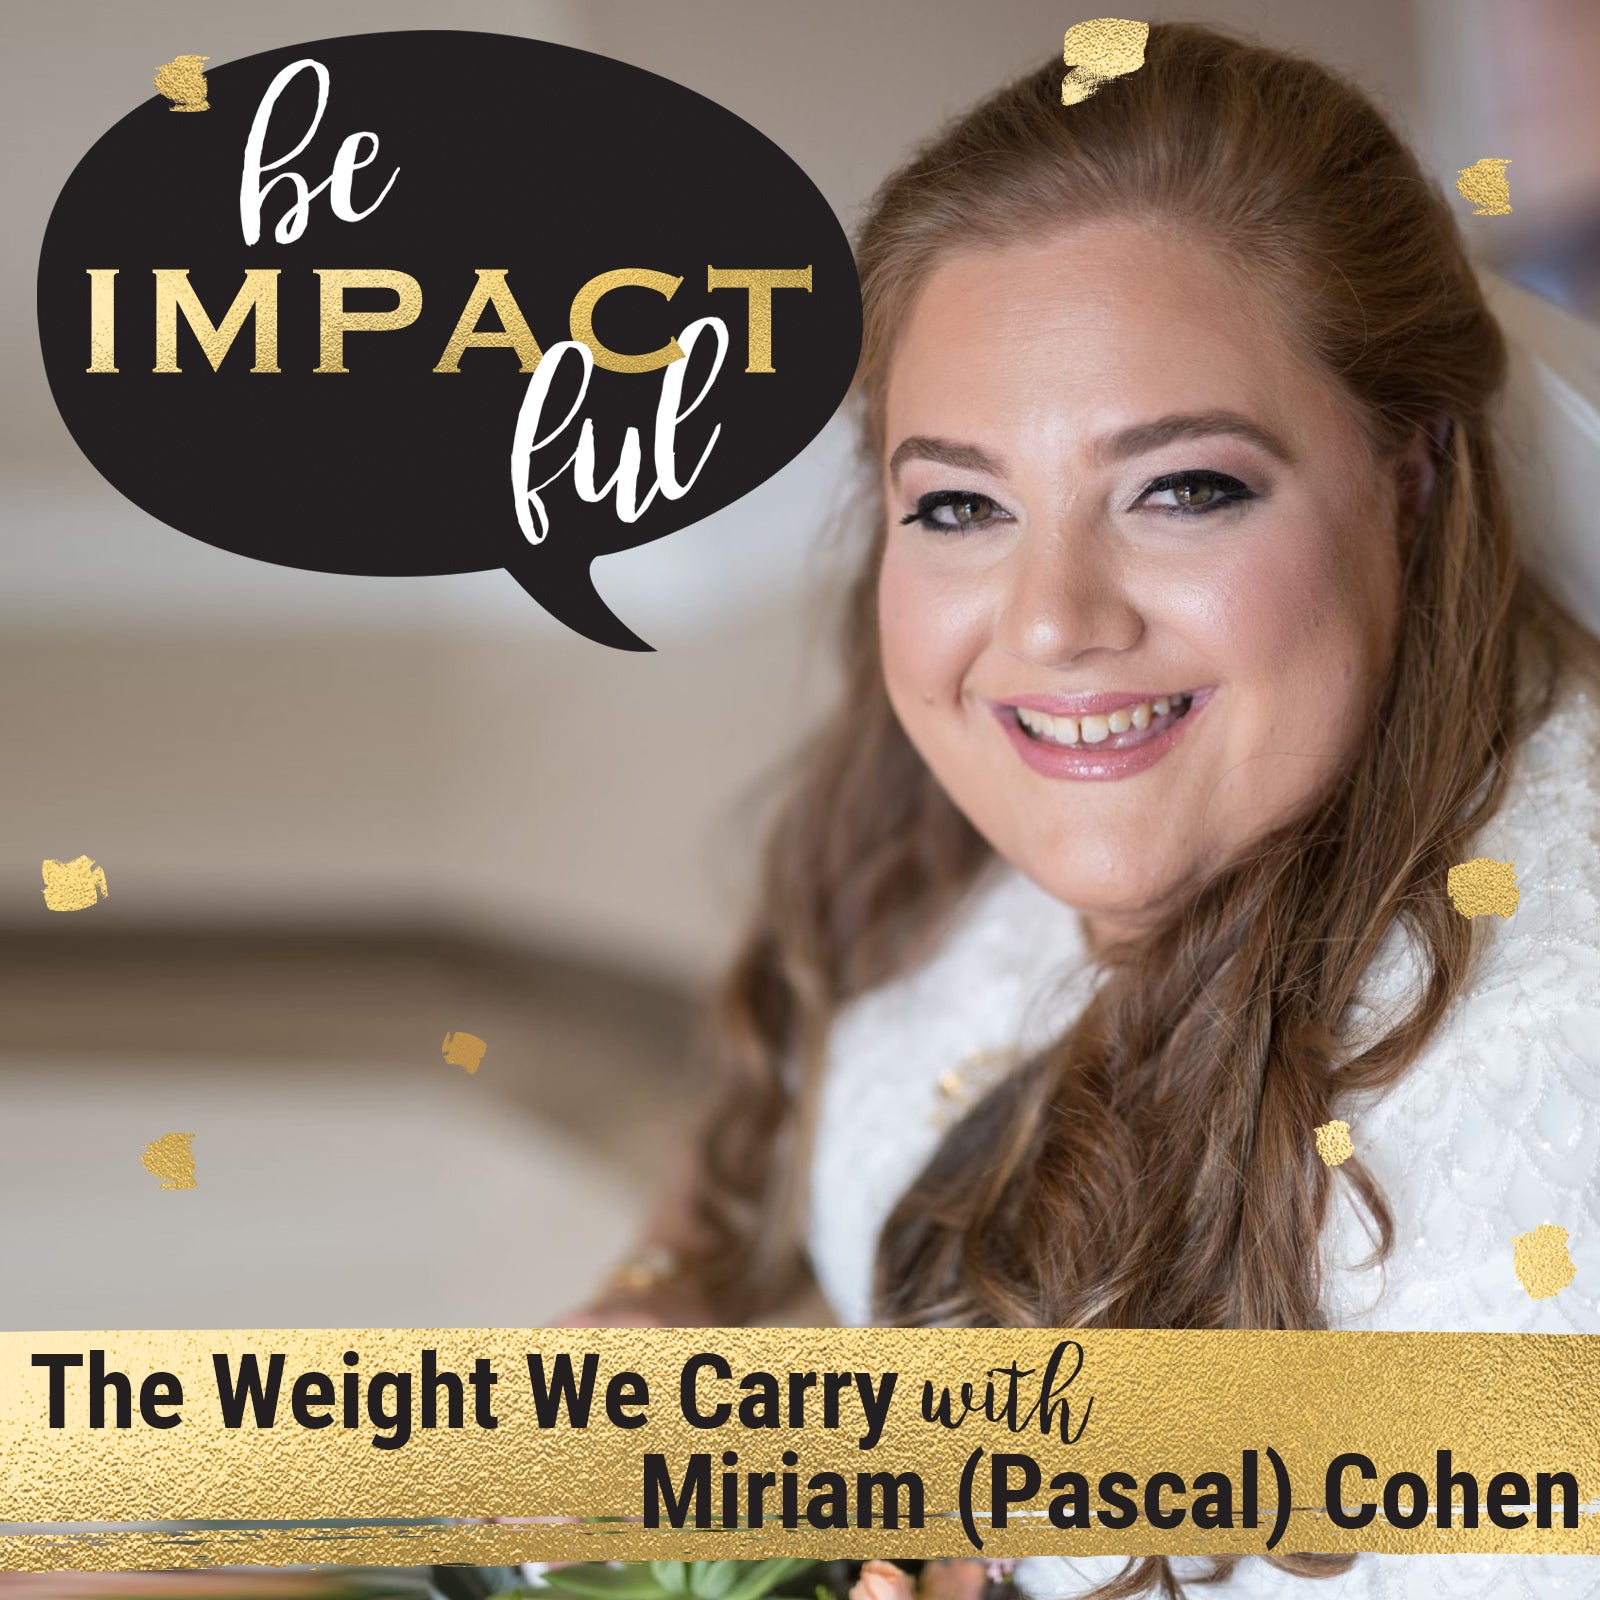 The Weight We Carry with Miriam (Pascal) Cohen